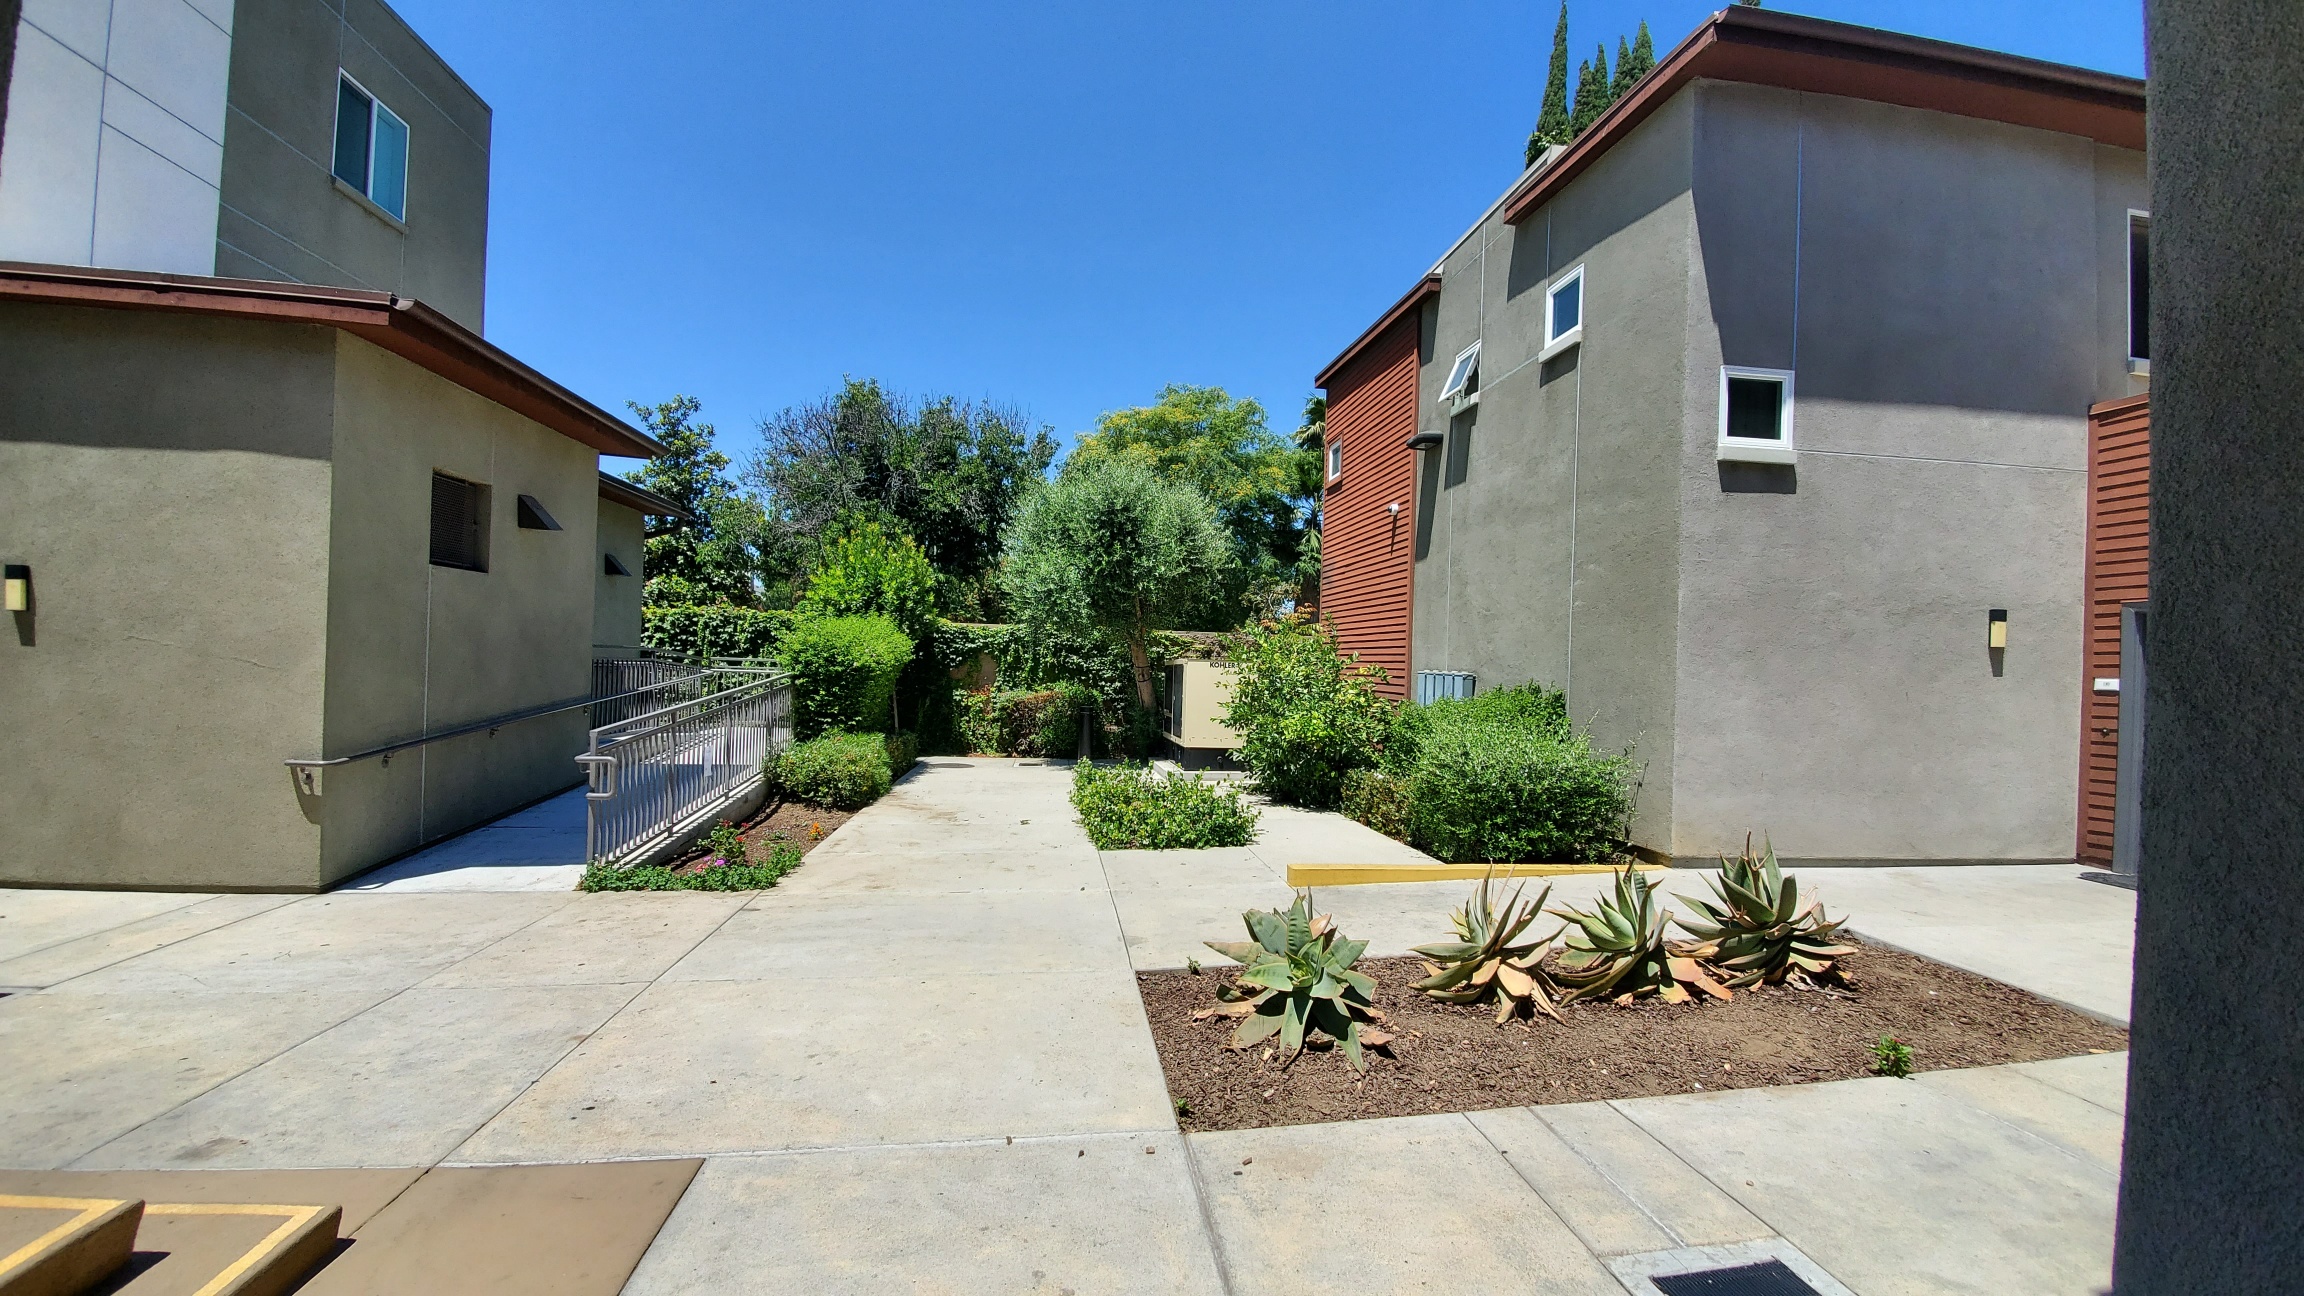 Different view of courtyard. There are various bushes, plants and trees. There is a ramp to access some units, and small steps to access another section of units.